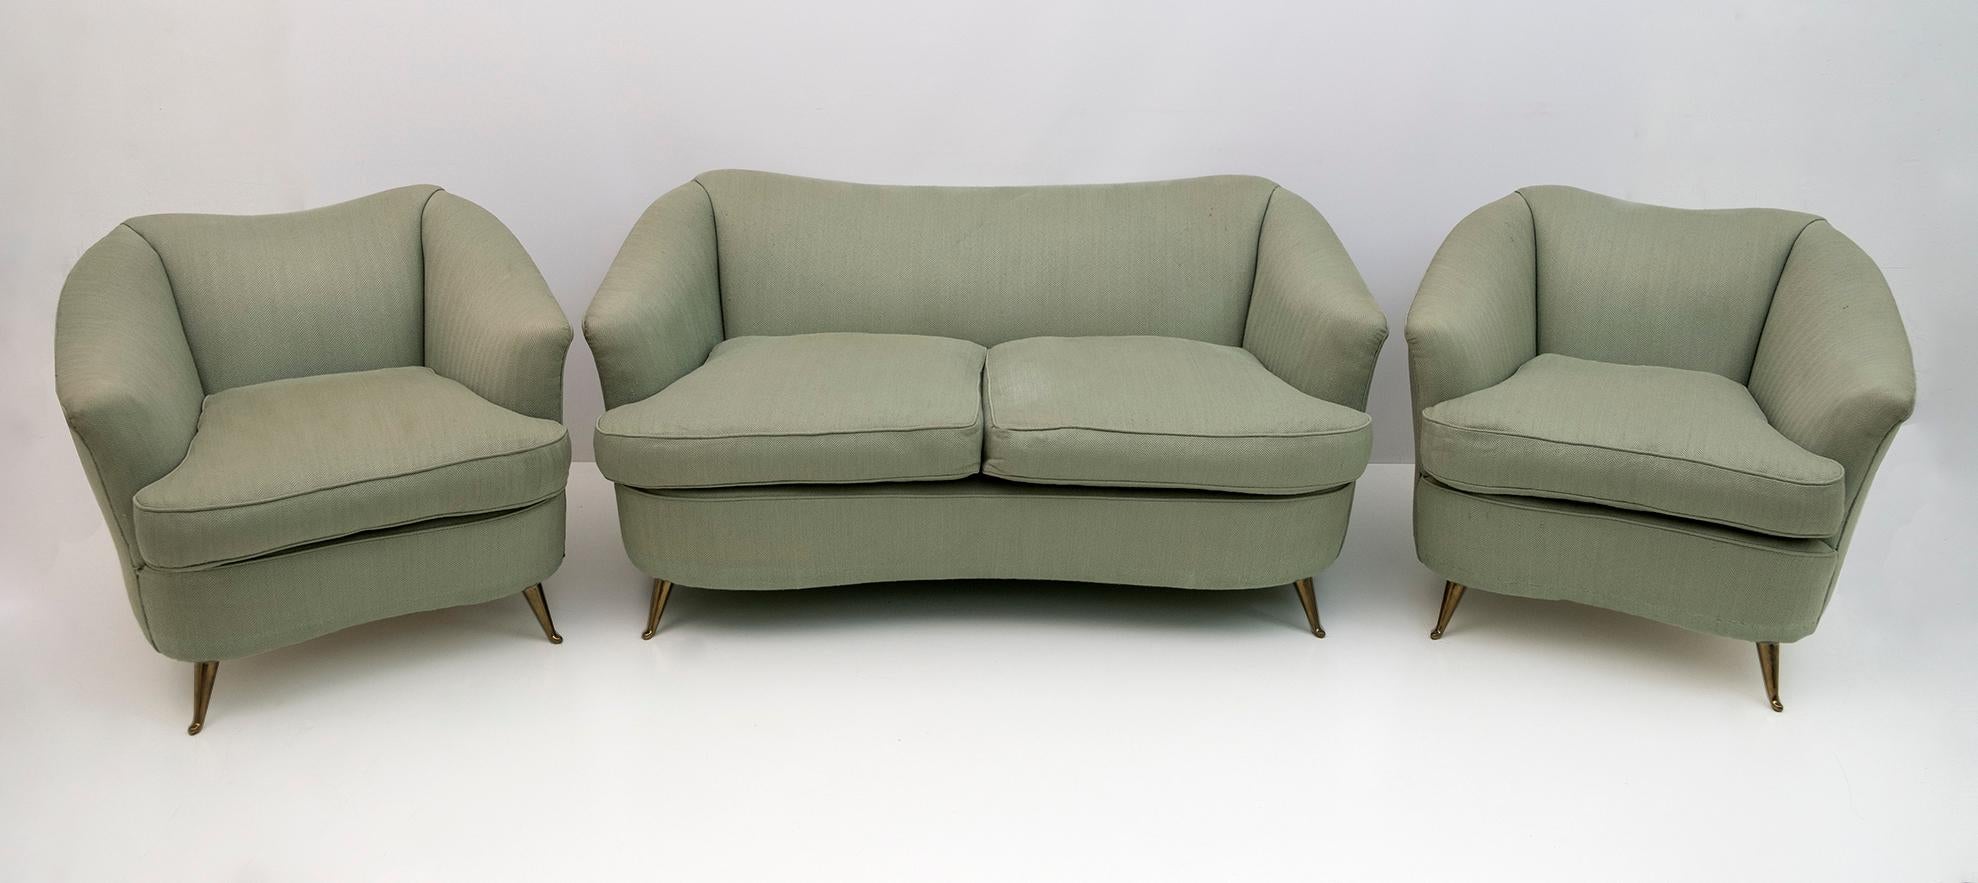 Vintage collectible two-seater and two-seater sofa designed by Gio Ponti for the Casa e Giardino manufacturing company in the late 1930s.
Original goose down cushions.
The upholstery was redone more than 20 years ago but it is not in good